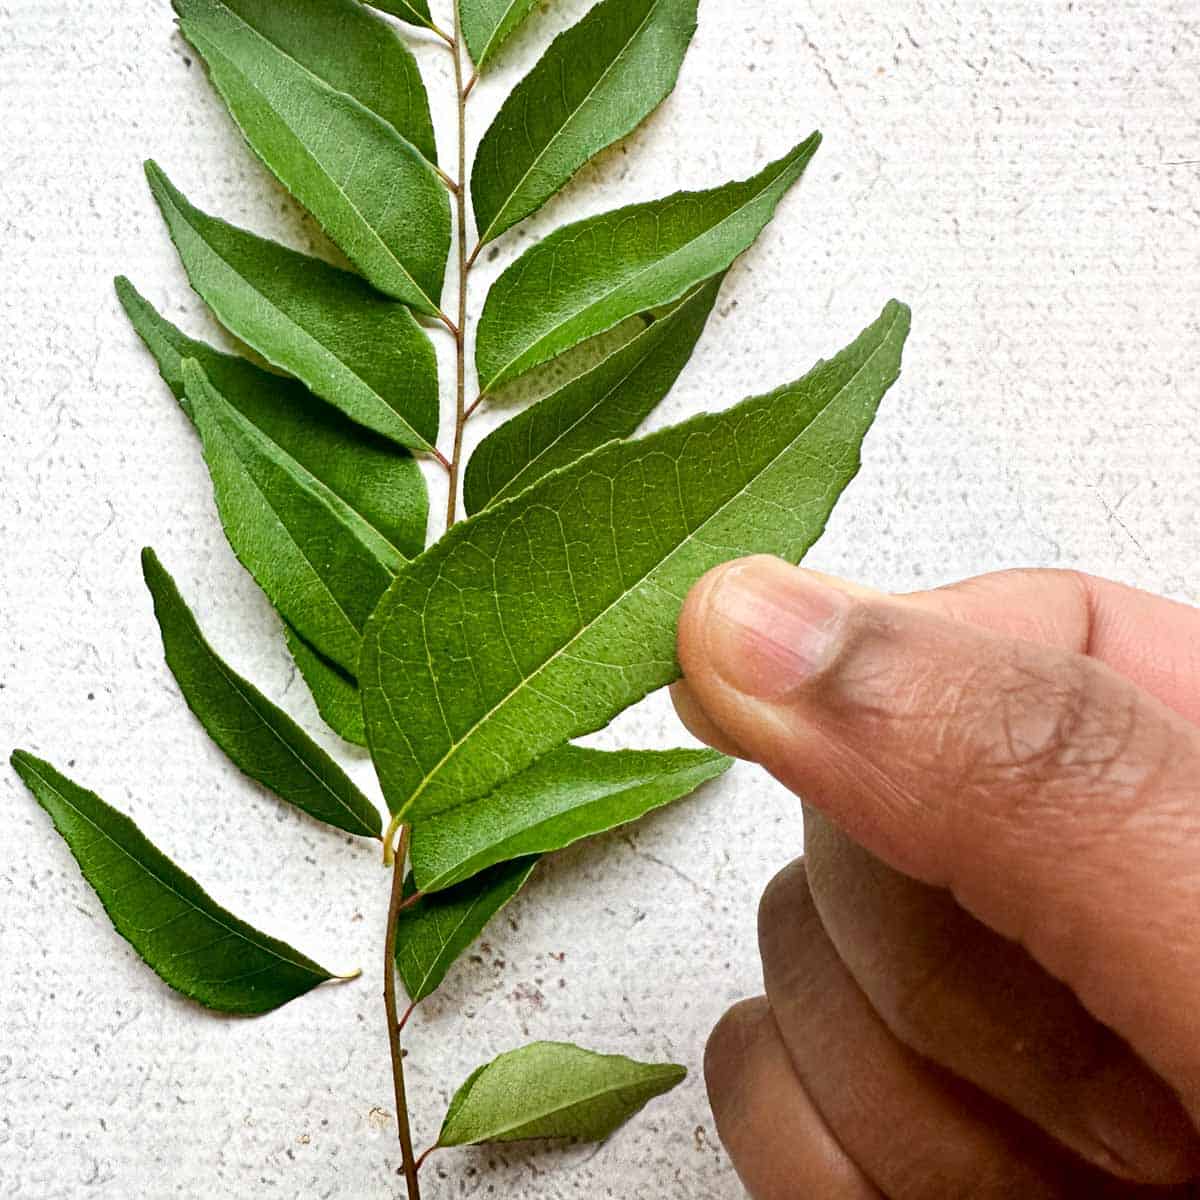 Curry leaves with a brown hand holding one leaf